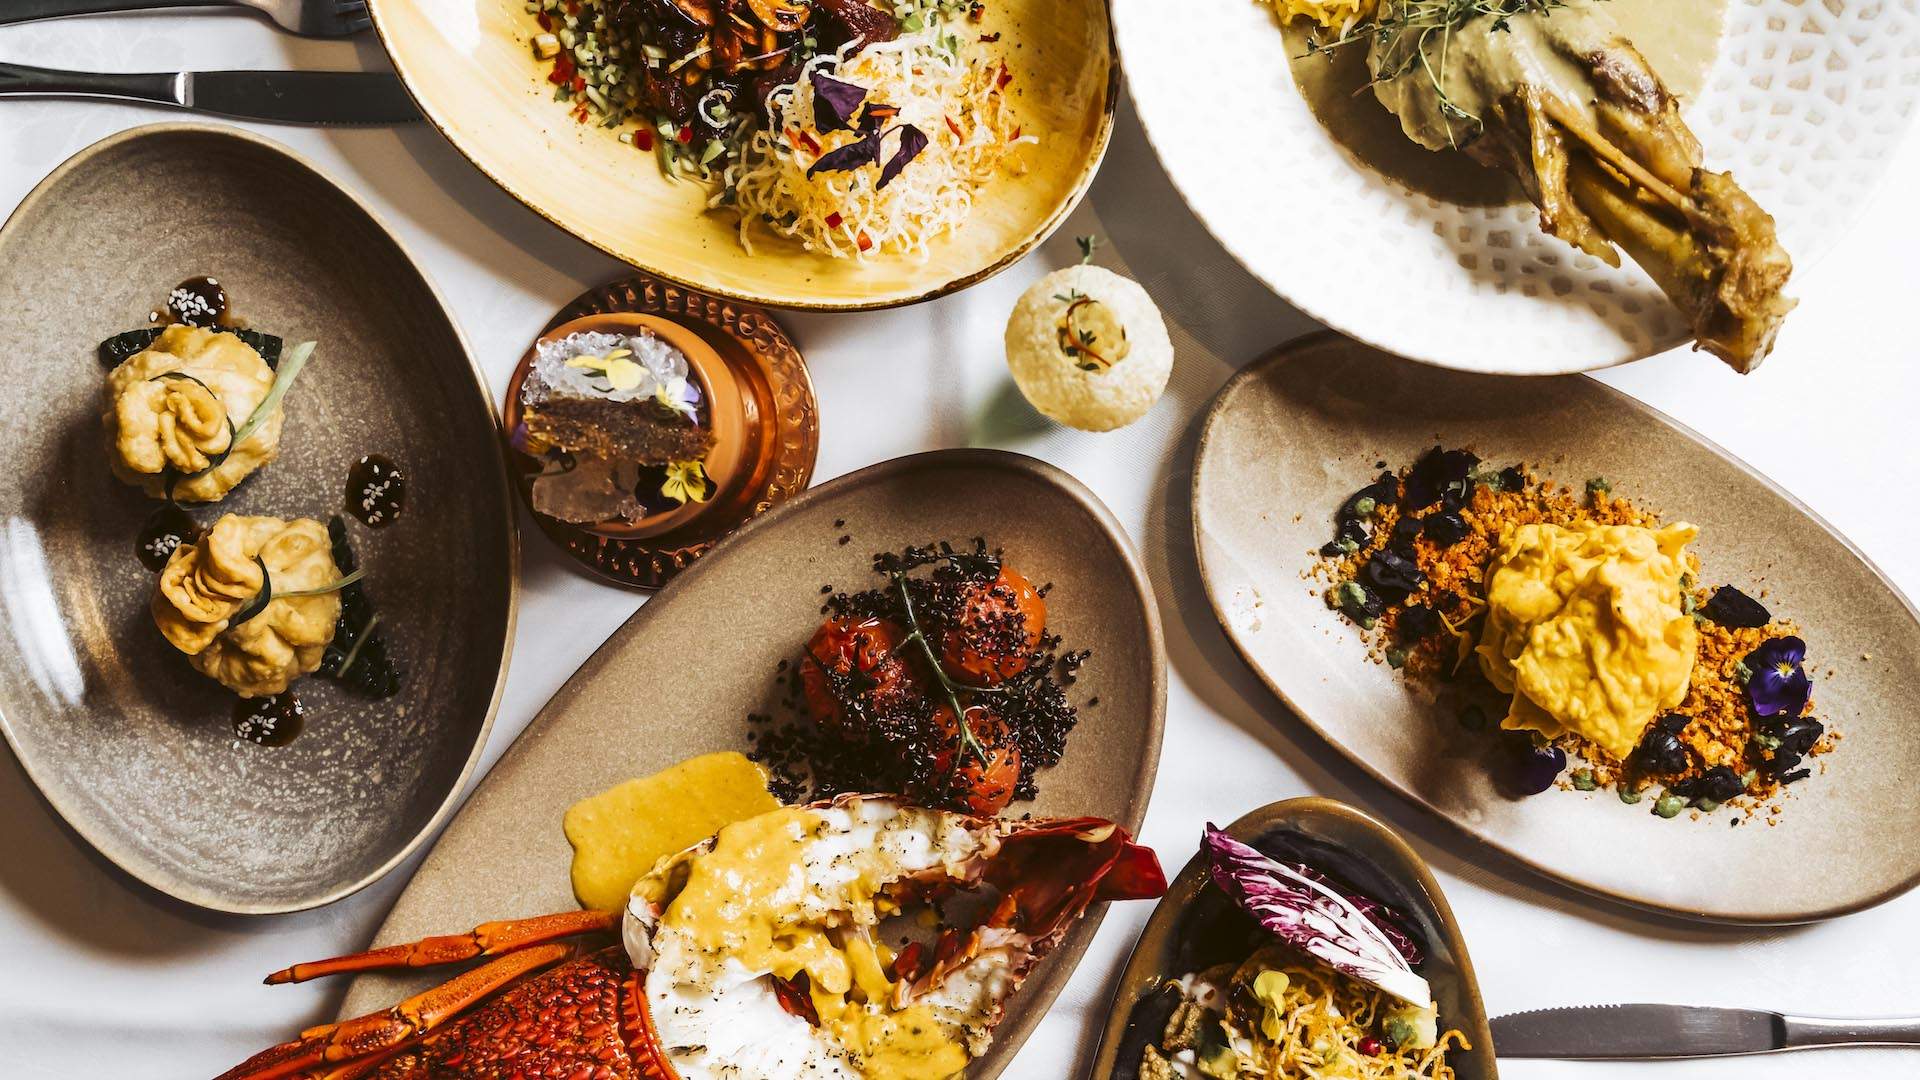 Ponsonby's Bolliwood Has Been Transformed Into a Fine Dining Indian Restaurant